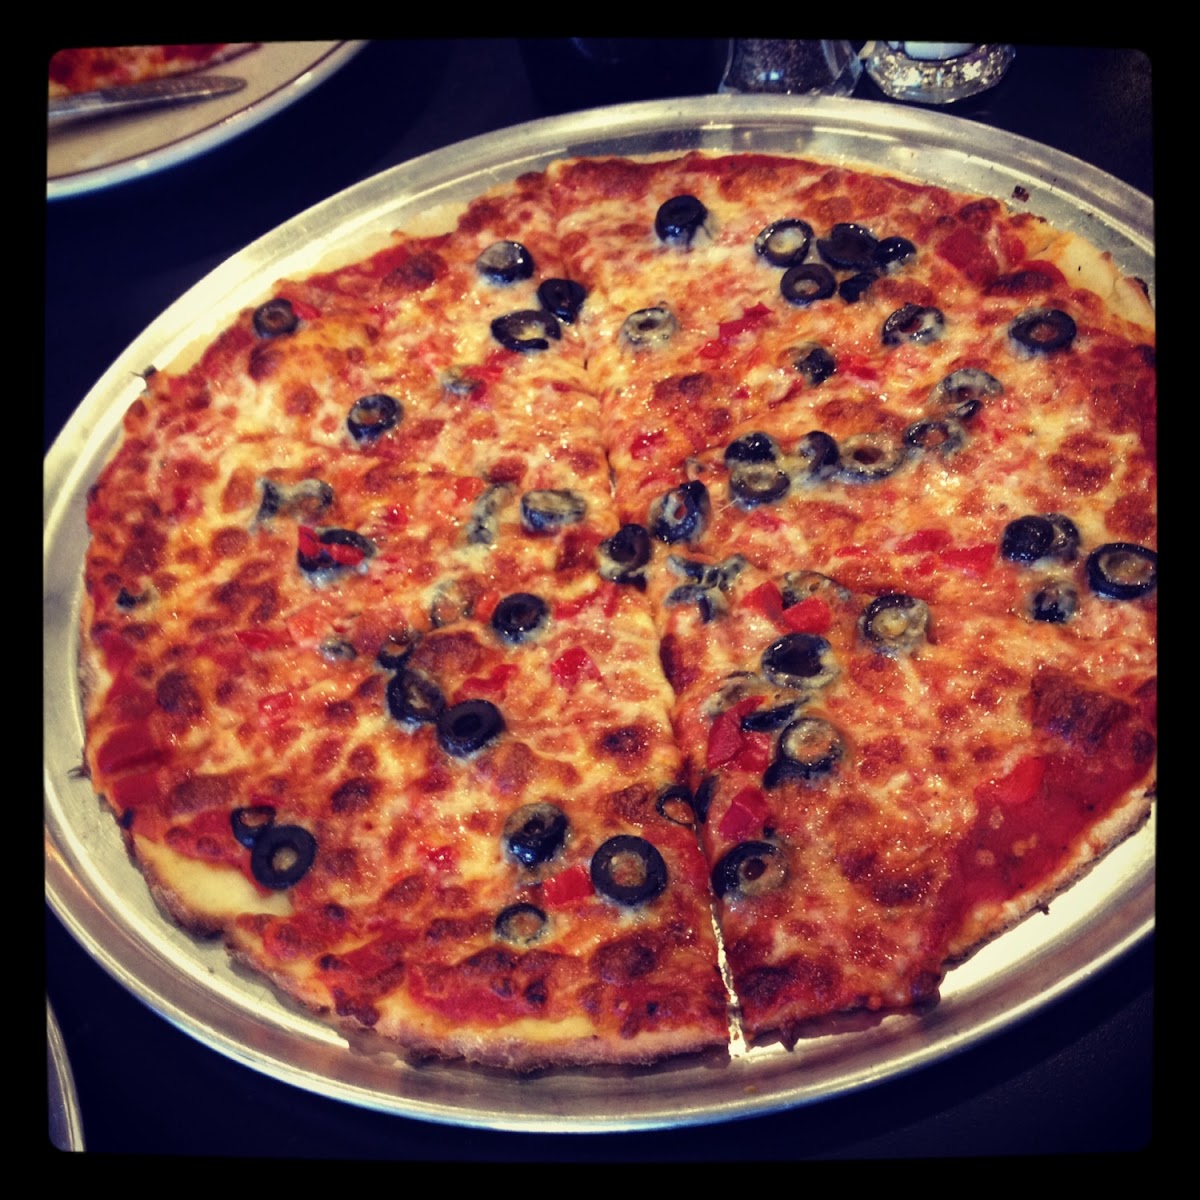 16" roasted red pepper & blk olive pizza